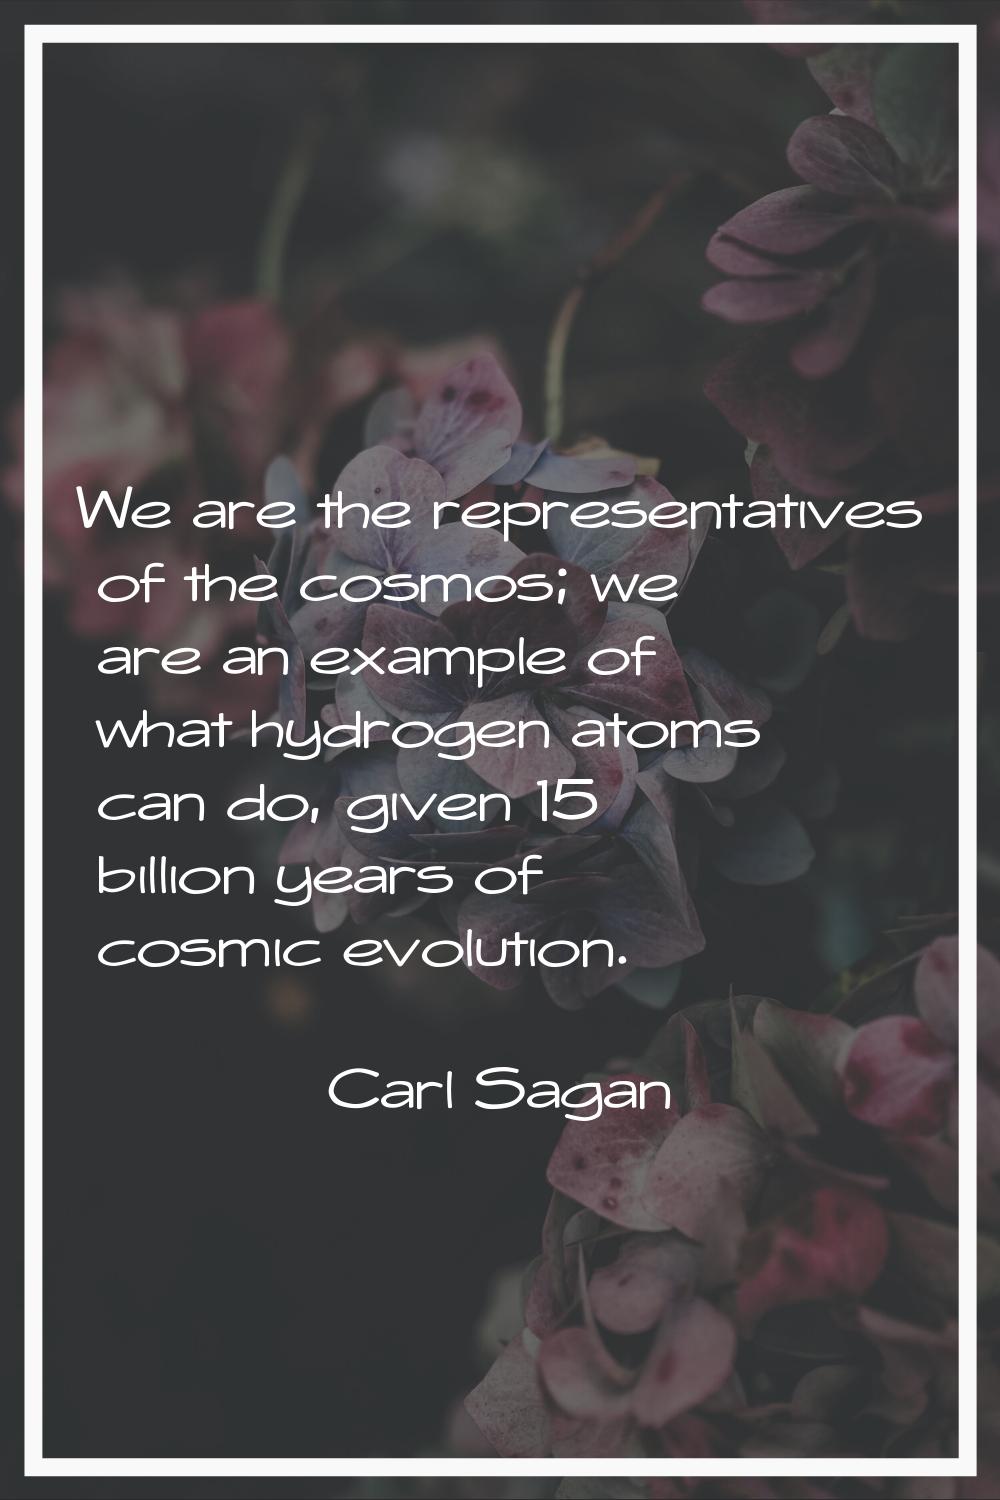 We are the representatives of the cosmos; we are an example of what hydrogen atoms can do, given 15